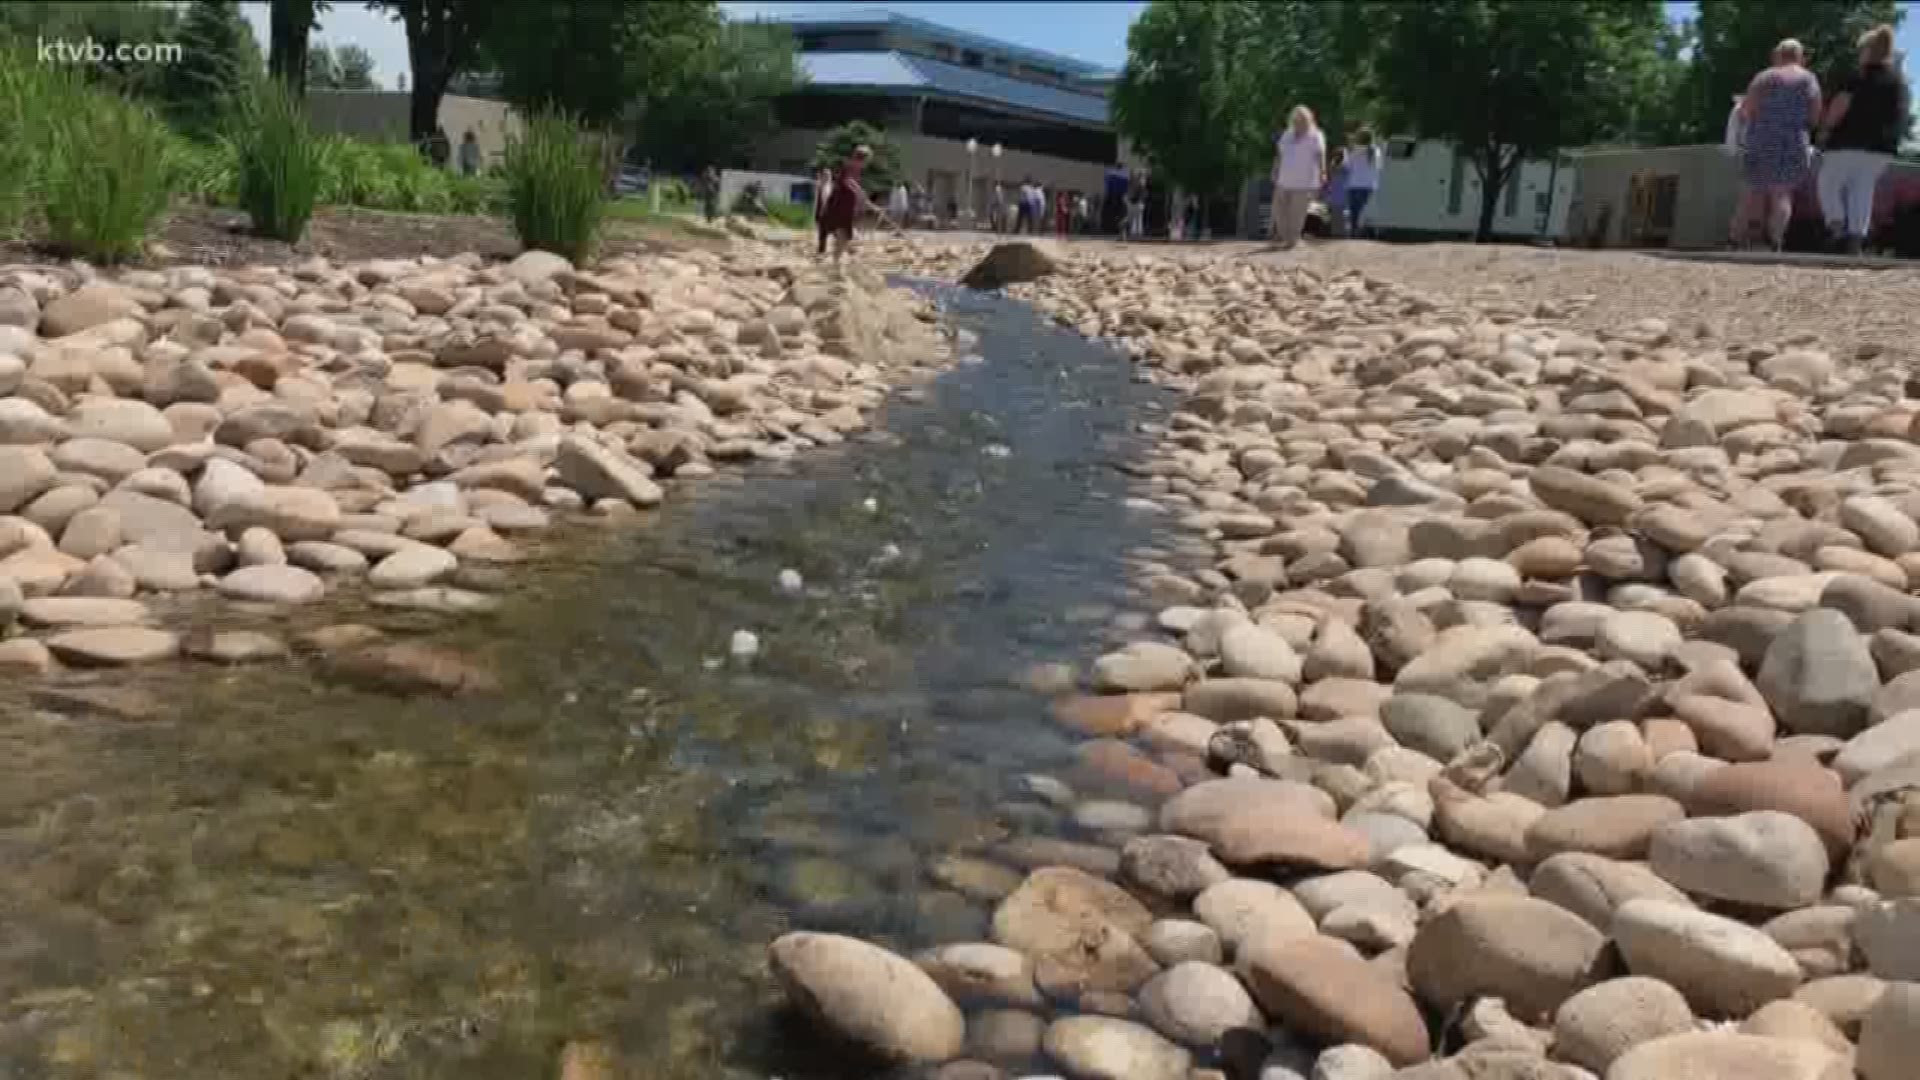 Blue Cross of Idaho employees sent a sea of rubber duckies bobbing down the creek that cuts through their campus Wednesday - all for a good cause.